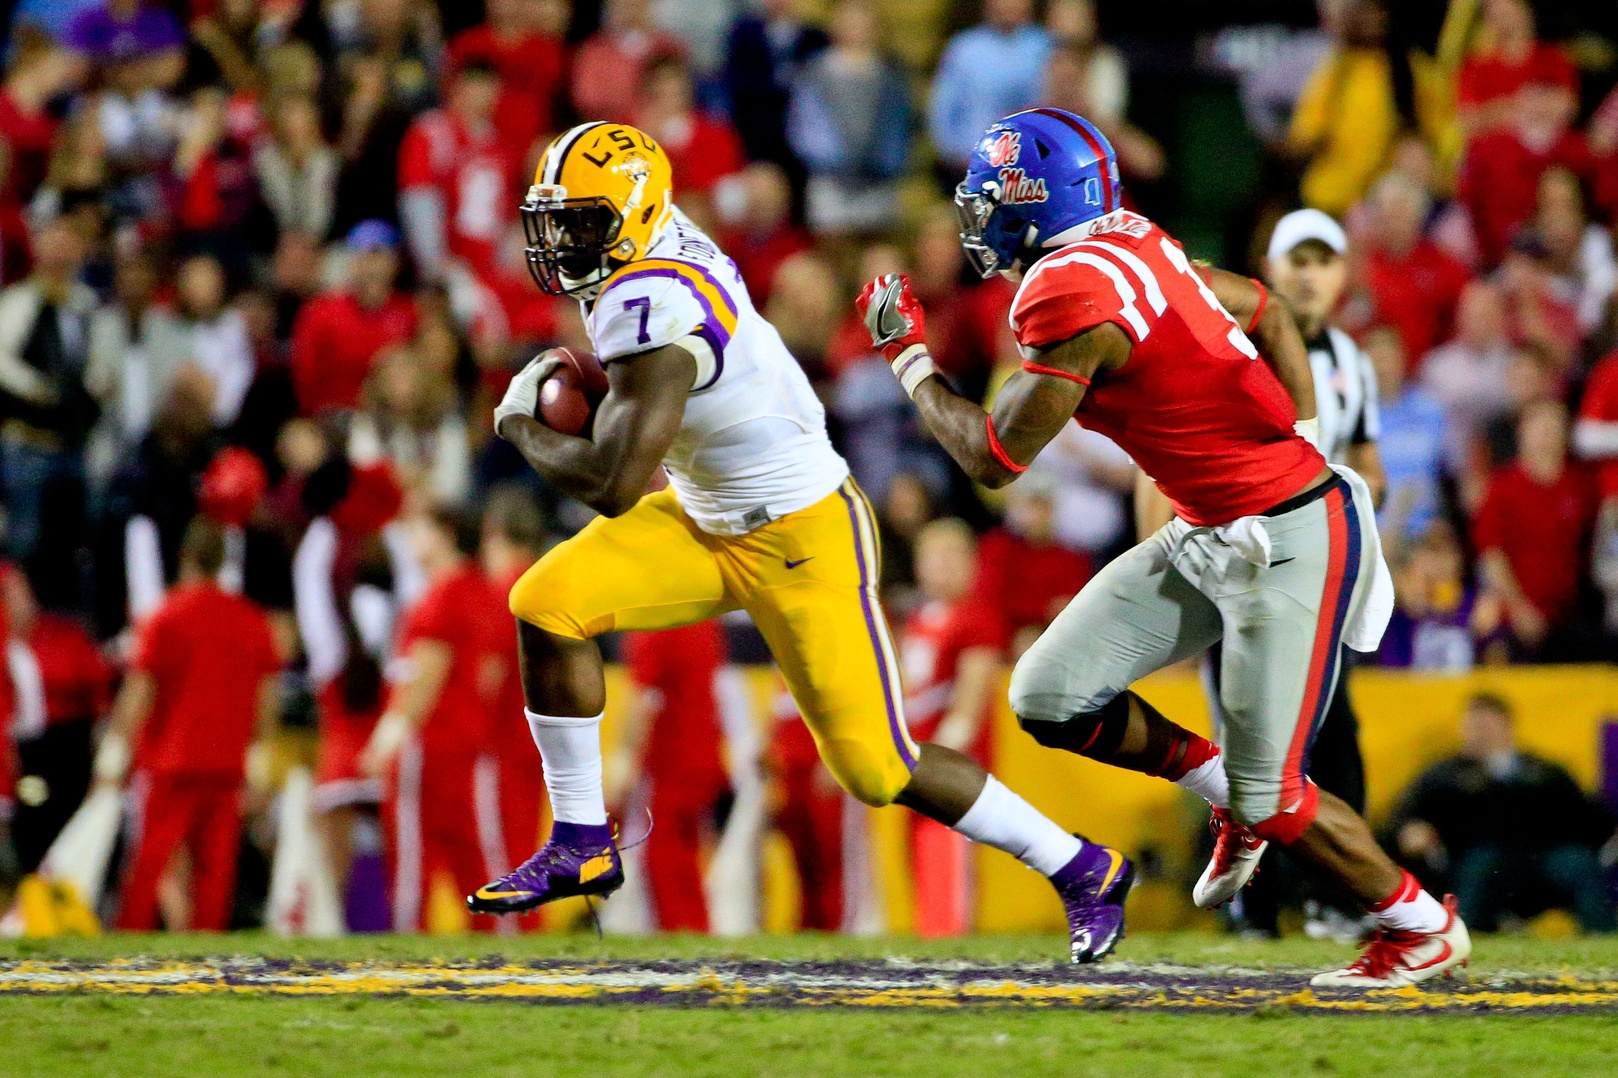 Oct 22, 2016; Baton Rouge, LA, USA; LSU Tigers running back Leonard Fournette (7) runs past Mississippi Rebels linebacker DeMarquis Gates (3) during the second half of a game at Tiger Stadium. LSU defeated Mississippi 38-21. Mandatory Credit: Derick E. Hingle-USA TODAY Sports